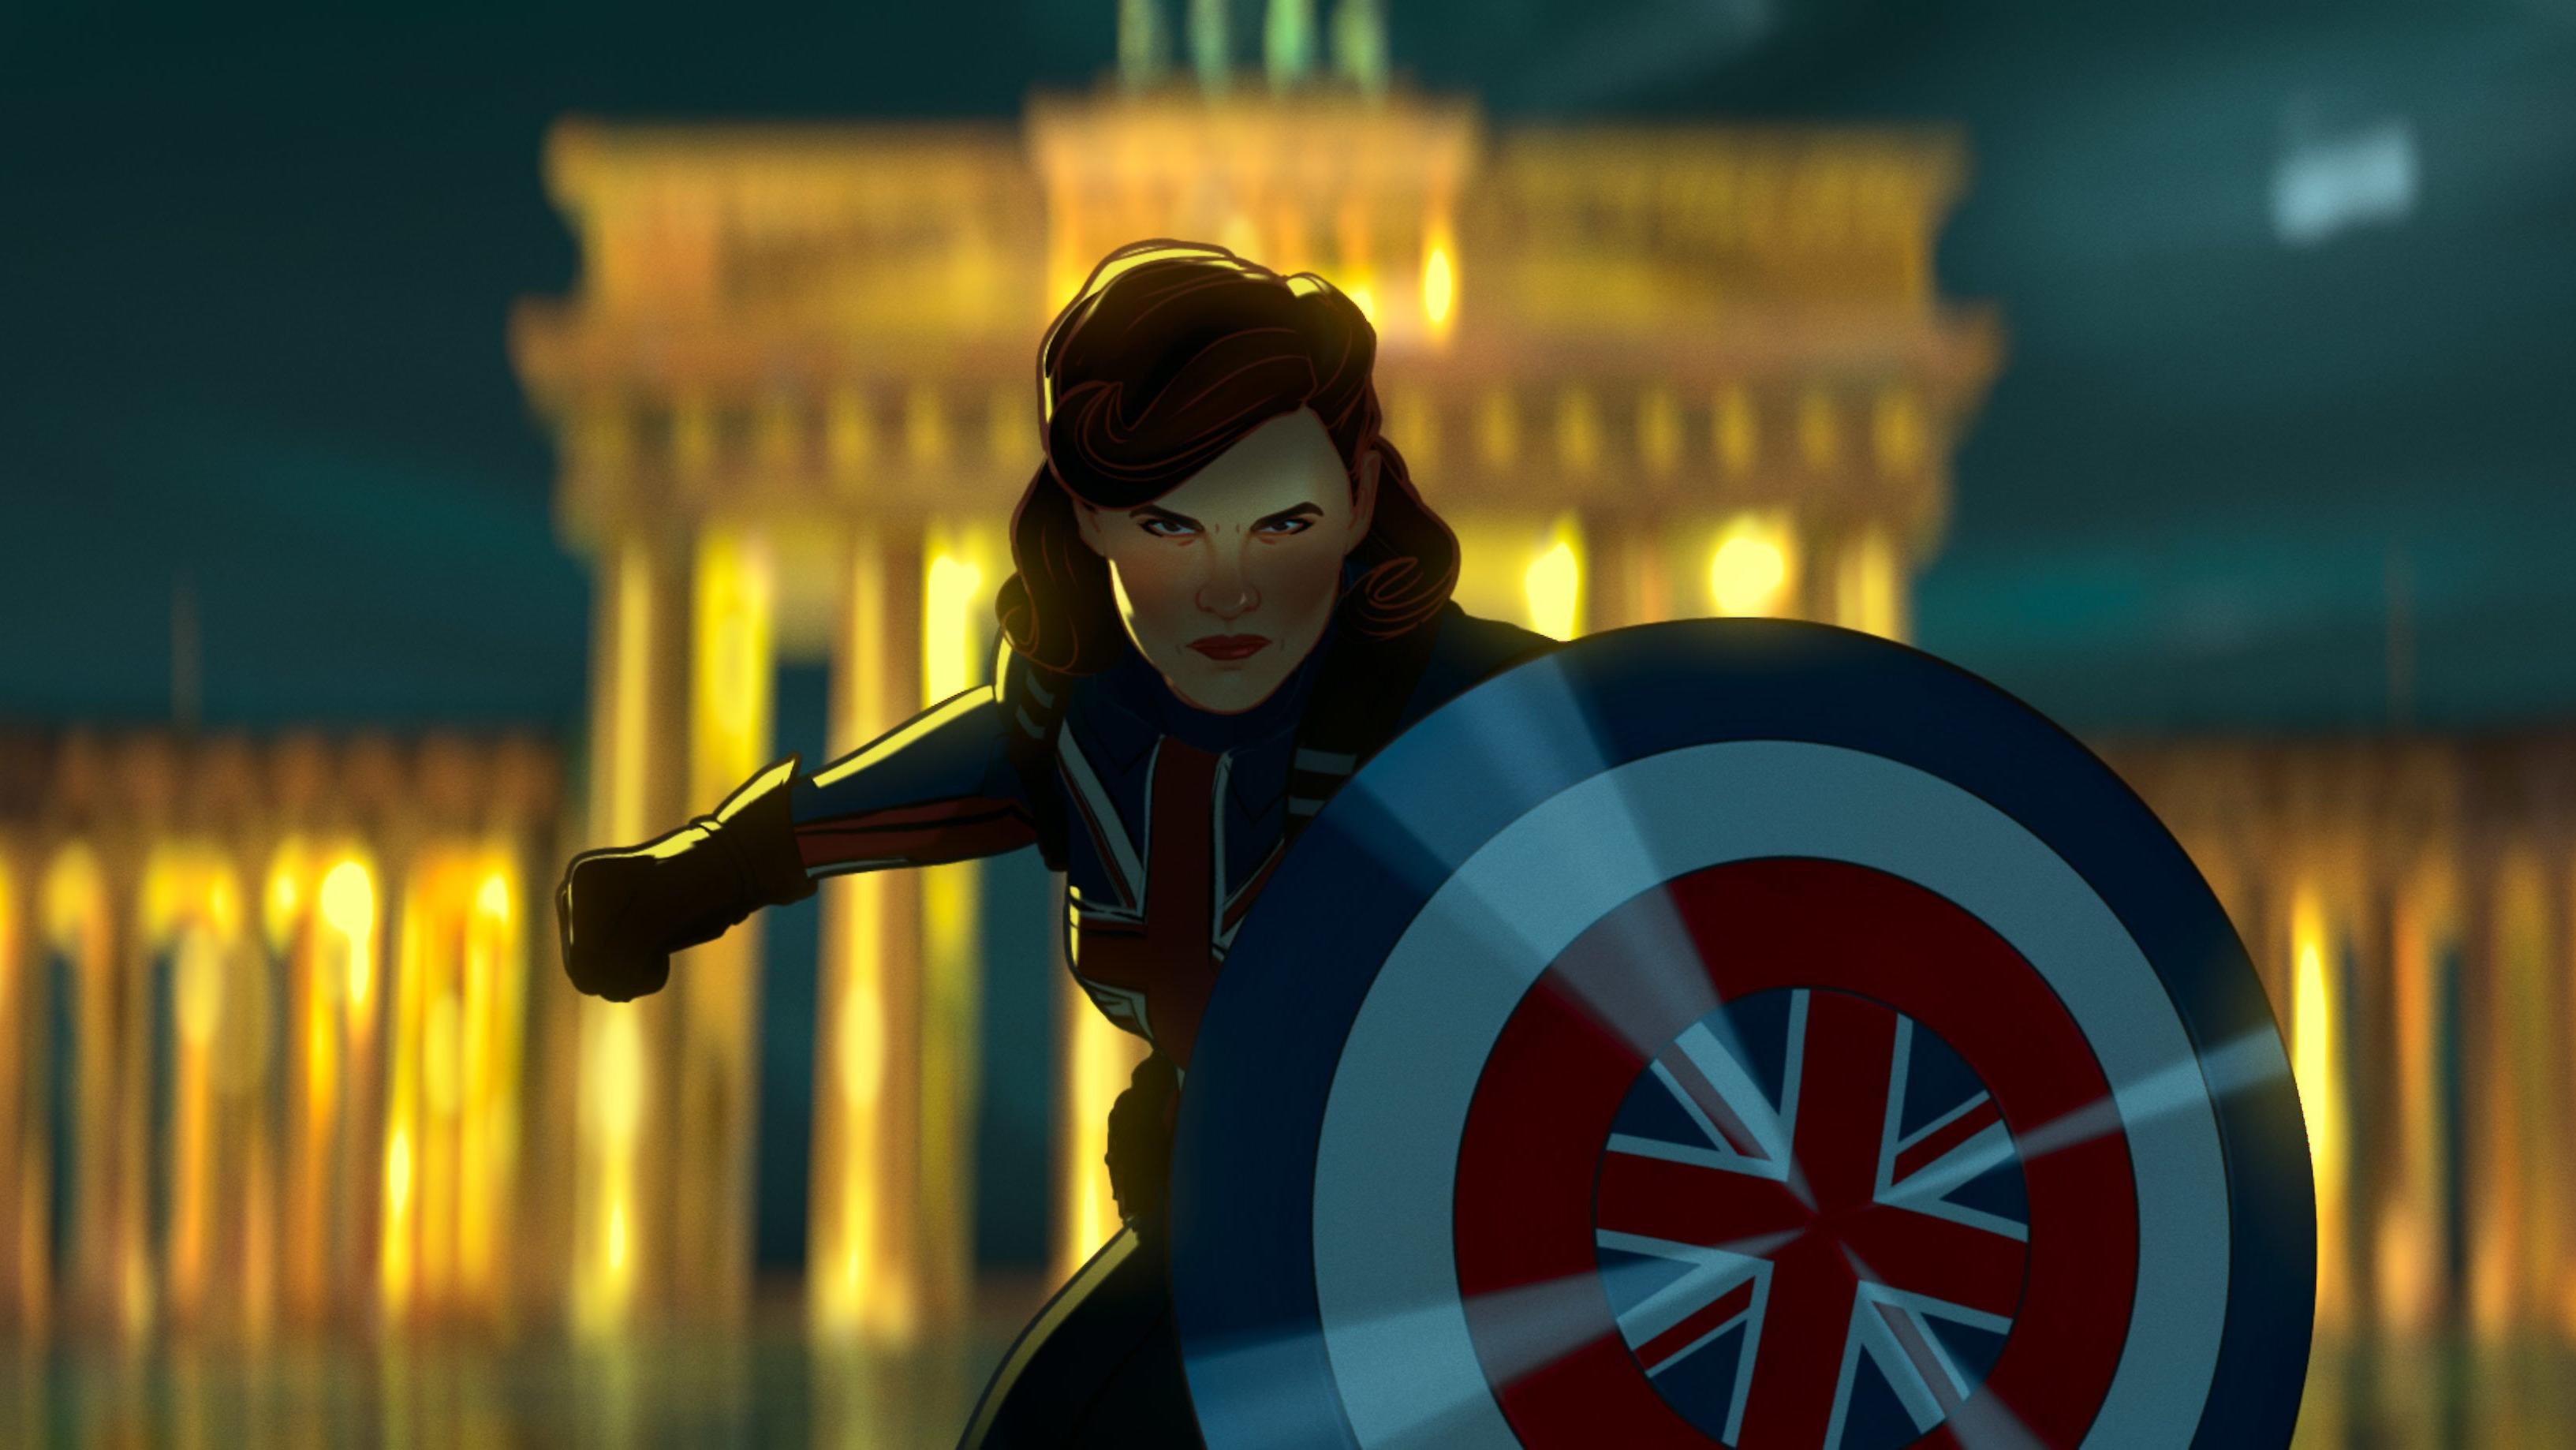 Peggy Carter is having a superhero moment, but Marvel seems desperate to blow it